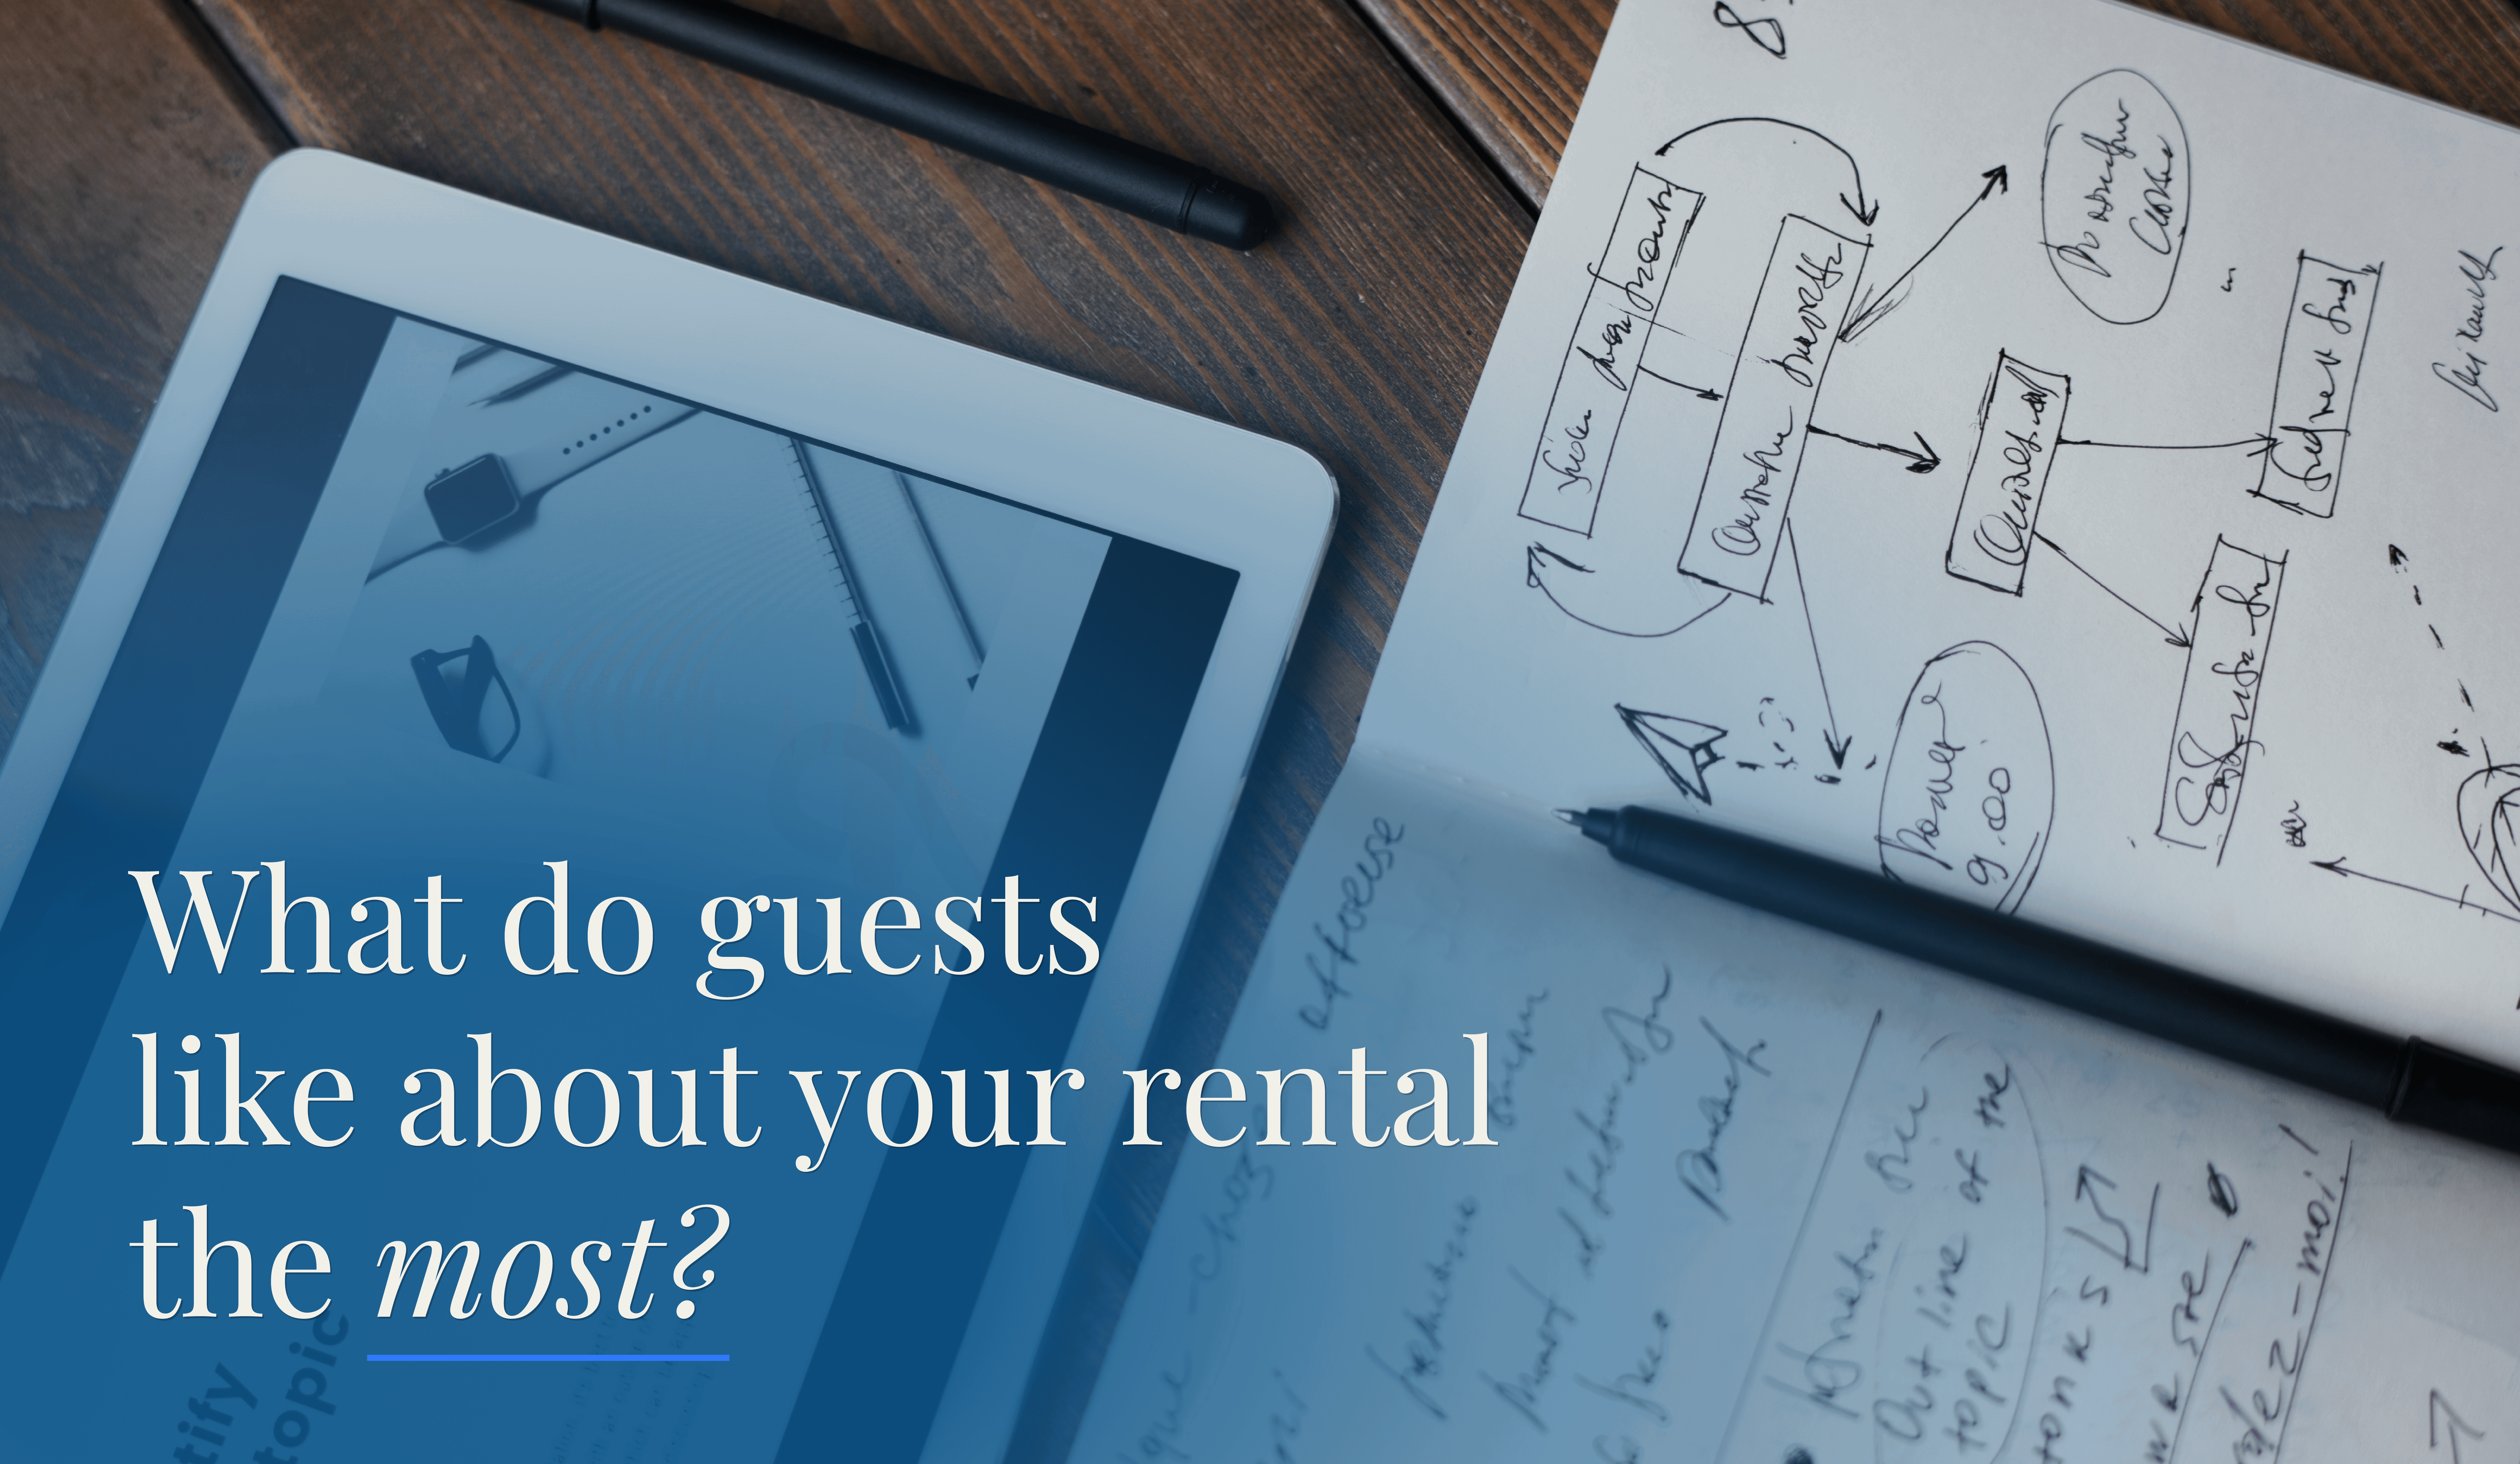 What do guests like about your rental the most?